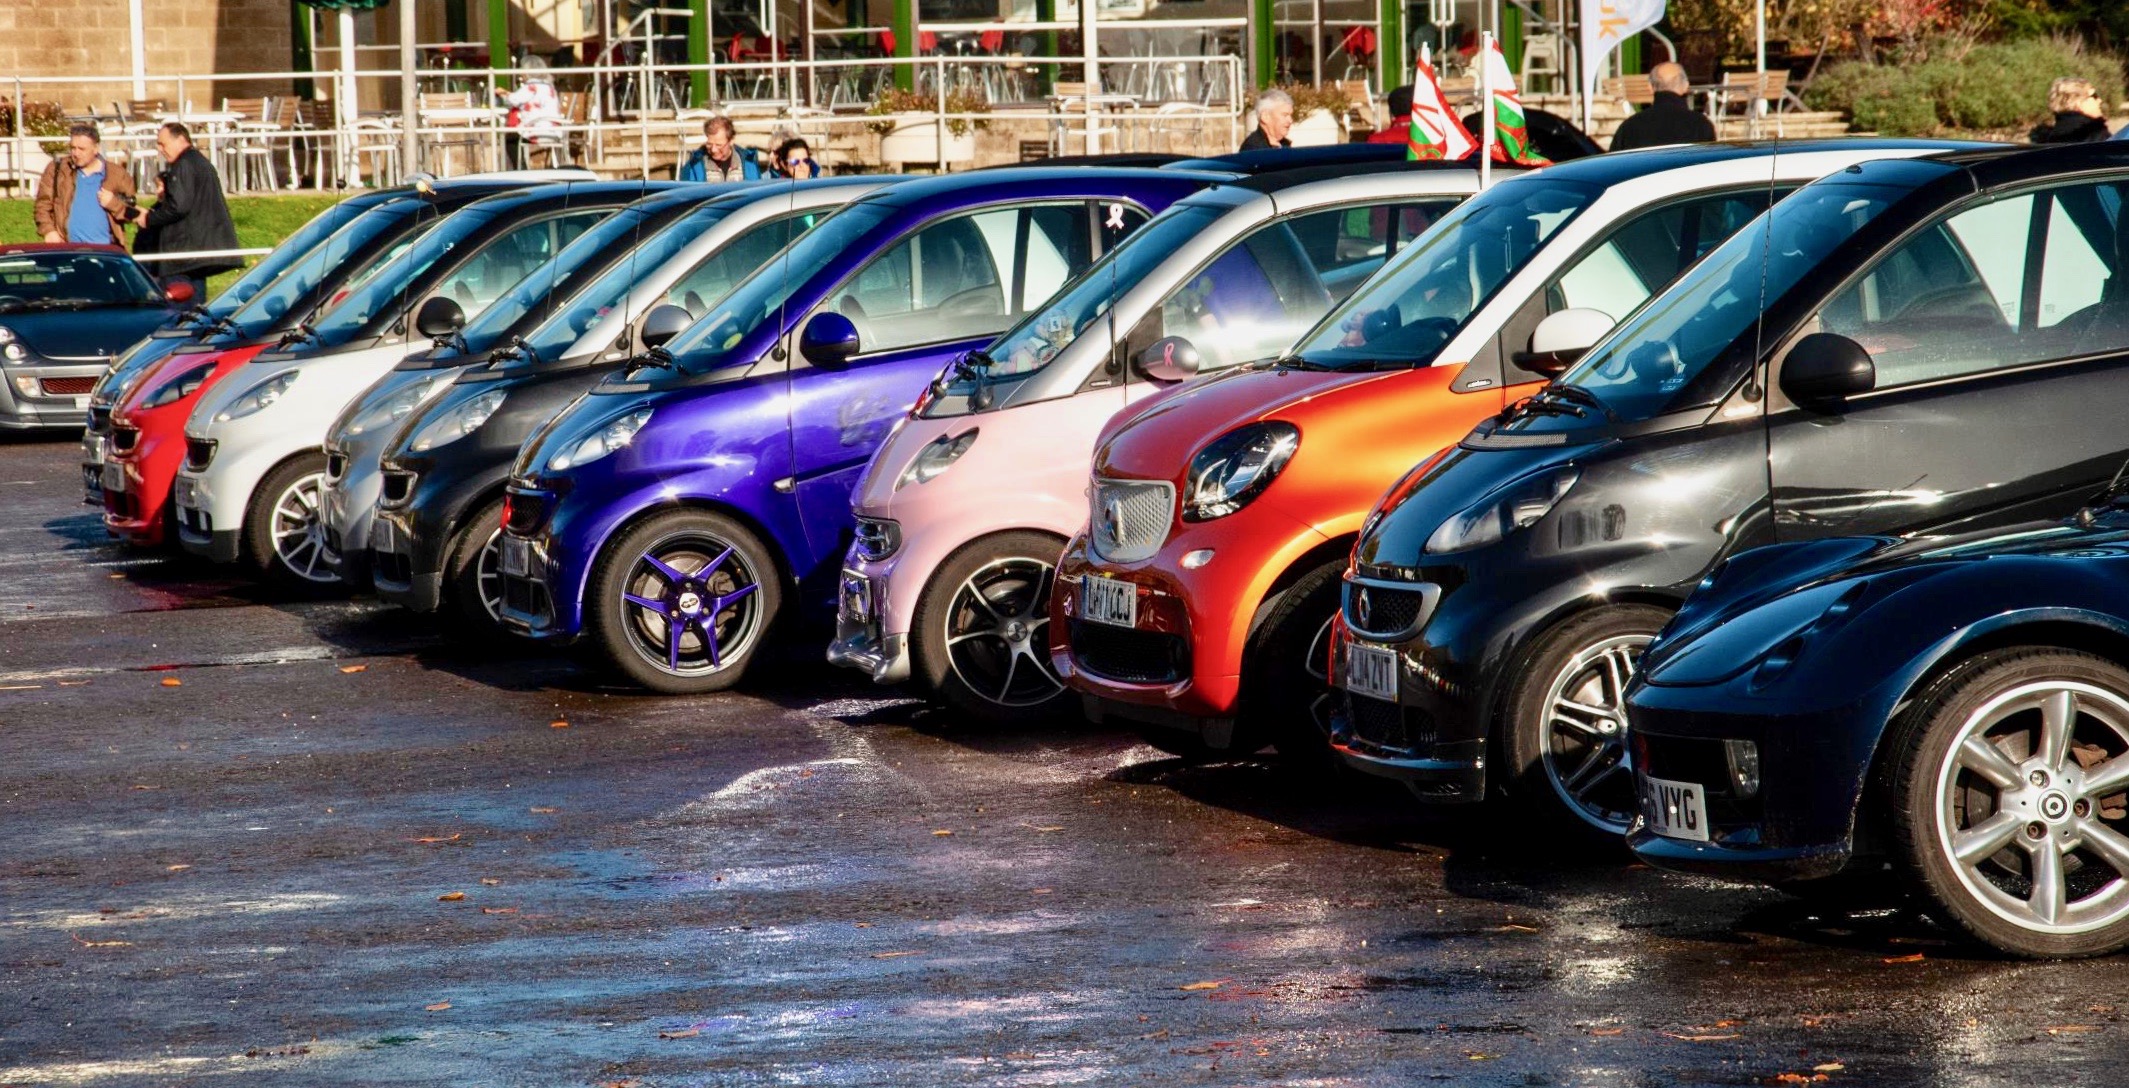 Smart Car, Question of the Day: What is your opinion of the Smart Car?, ClassicCars.com Journal